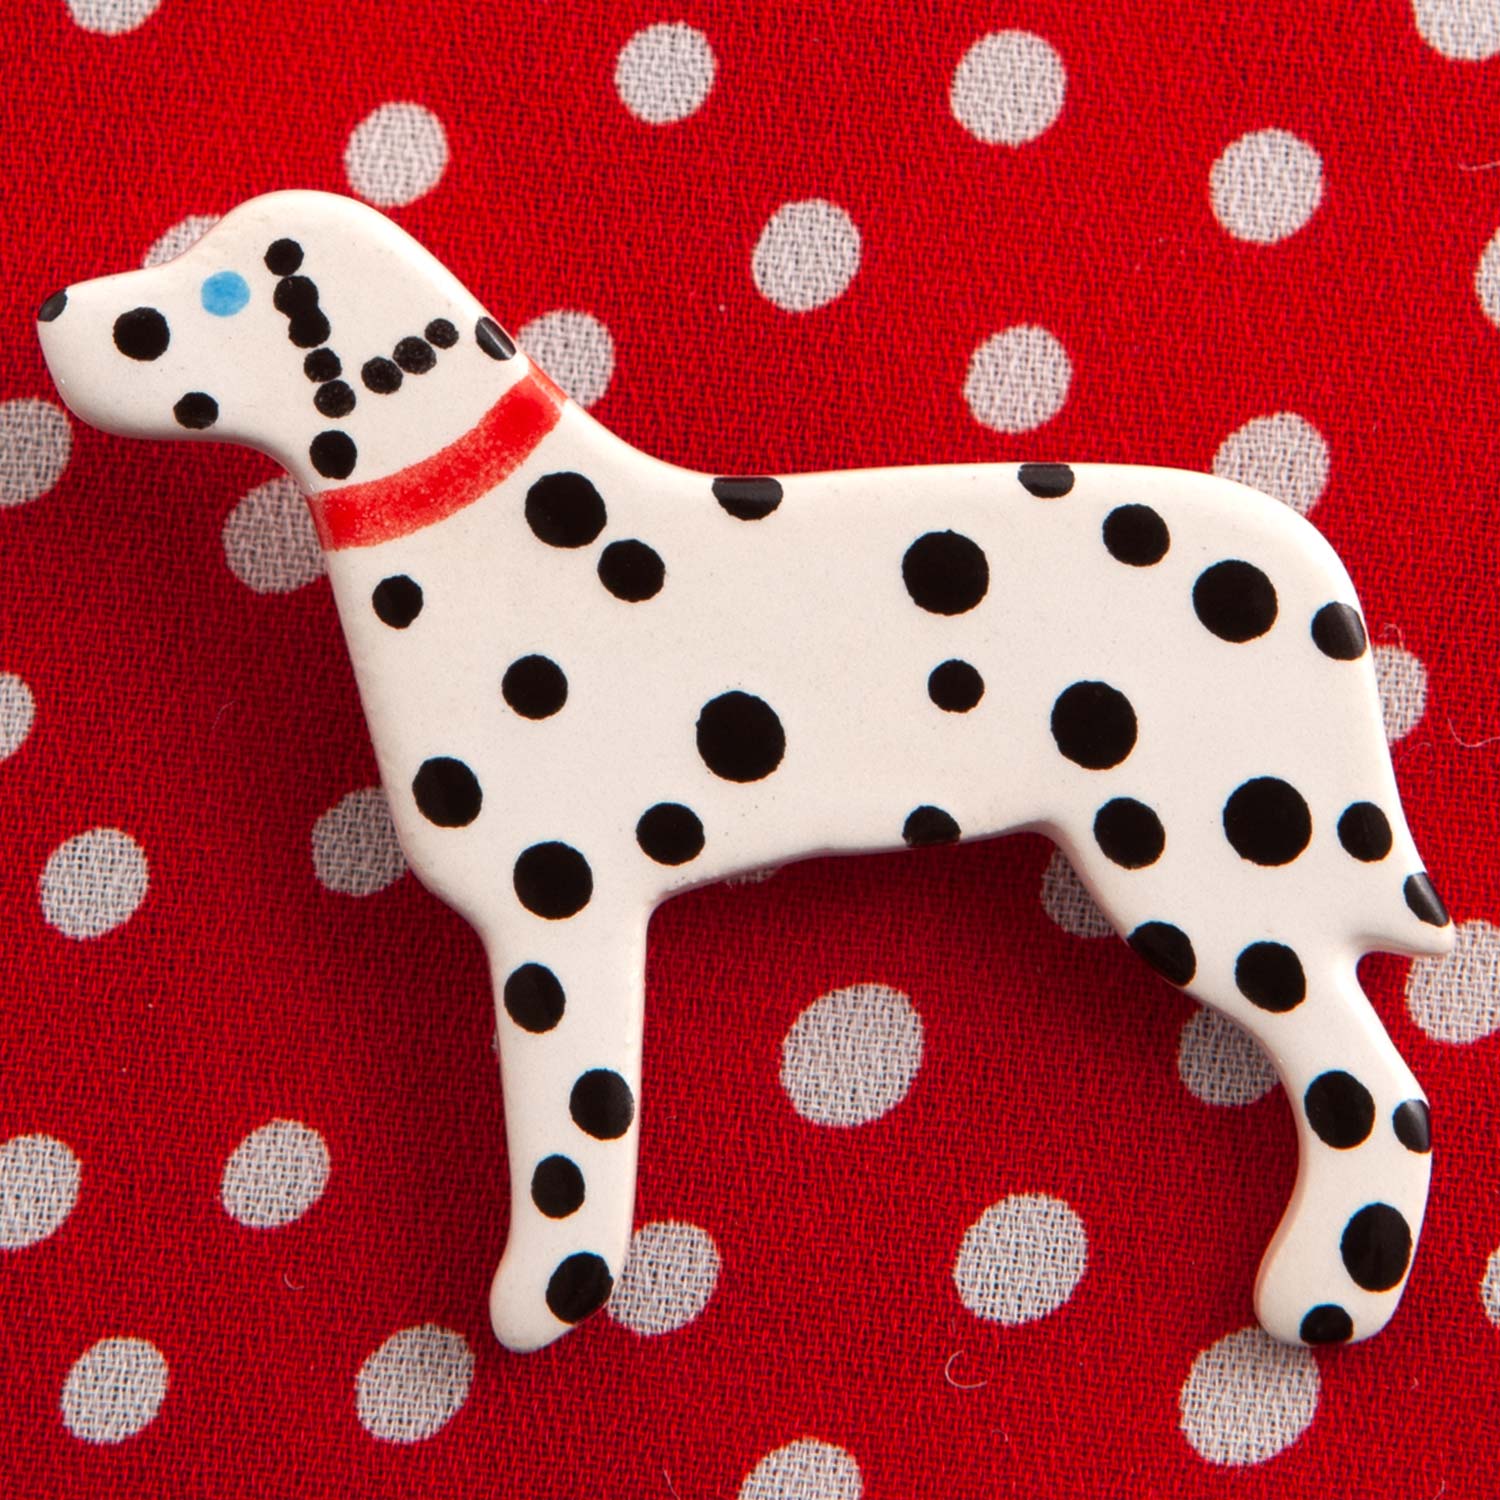 Dog Lover Gifts available at Dog Krazy Gifts – Ceramic Chocolate Labrador Brooch by Mary Goldberg of Stockwell Ceramics, Just Part Of Our Collection Of Dalmatian Themed Gifts, Available At www.dogkrazygifts.co.uk